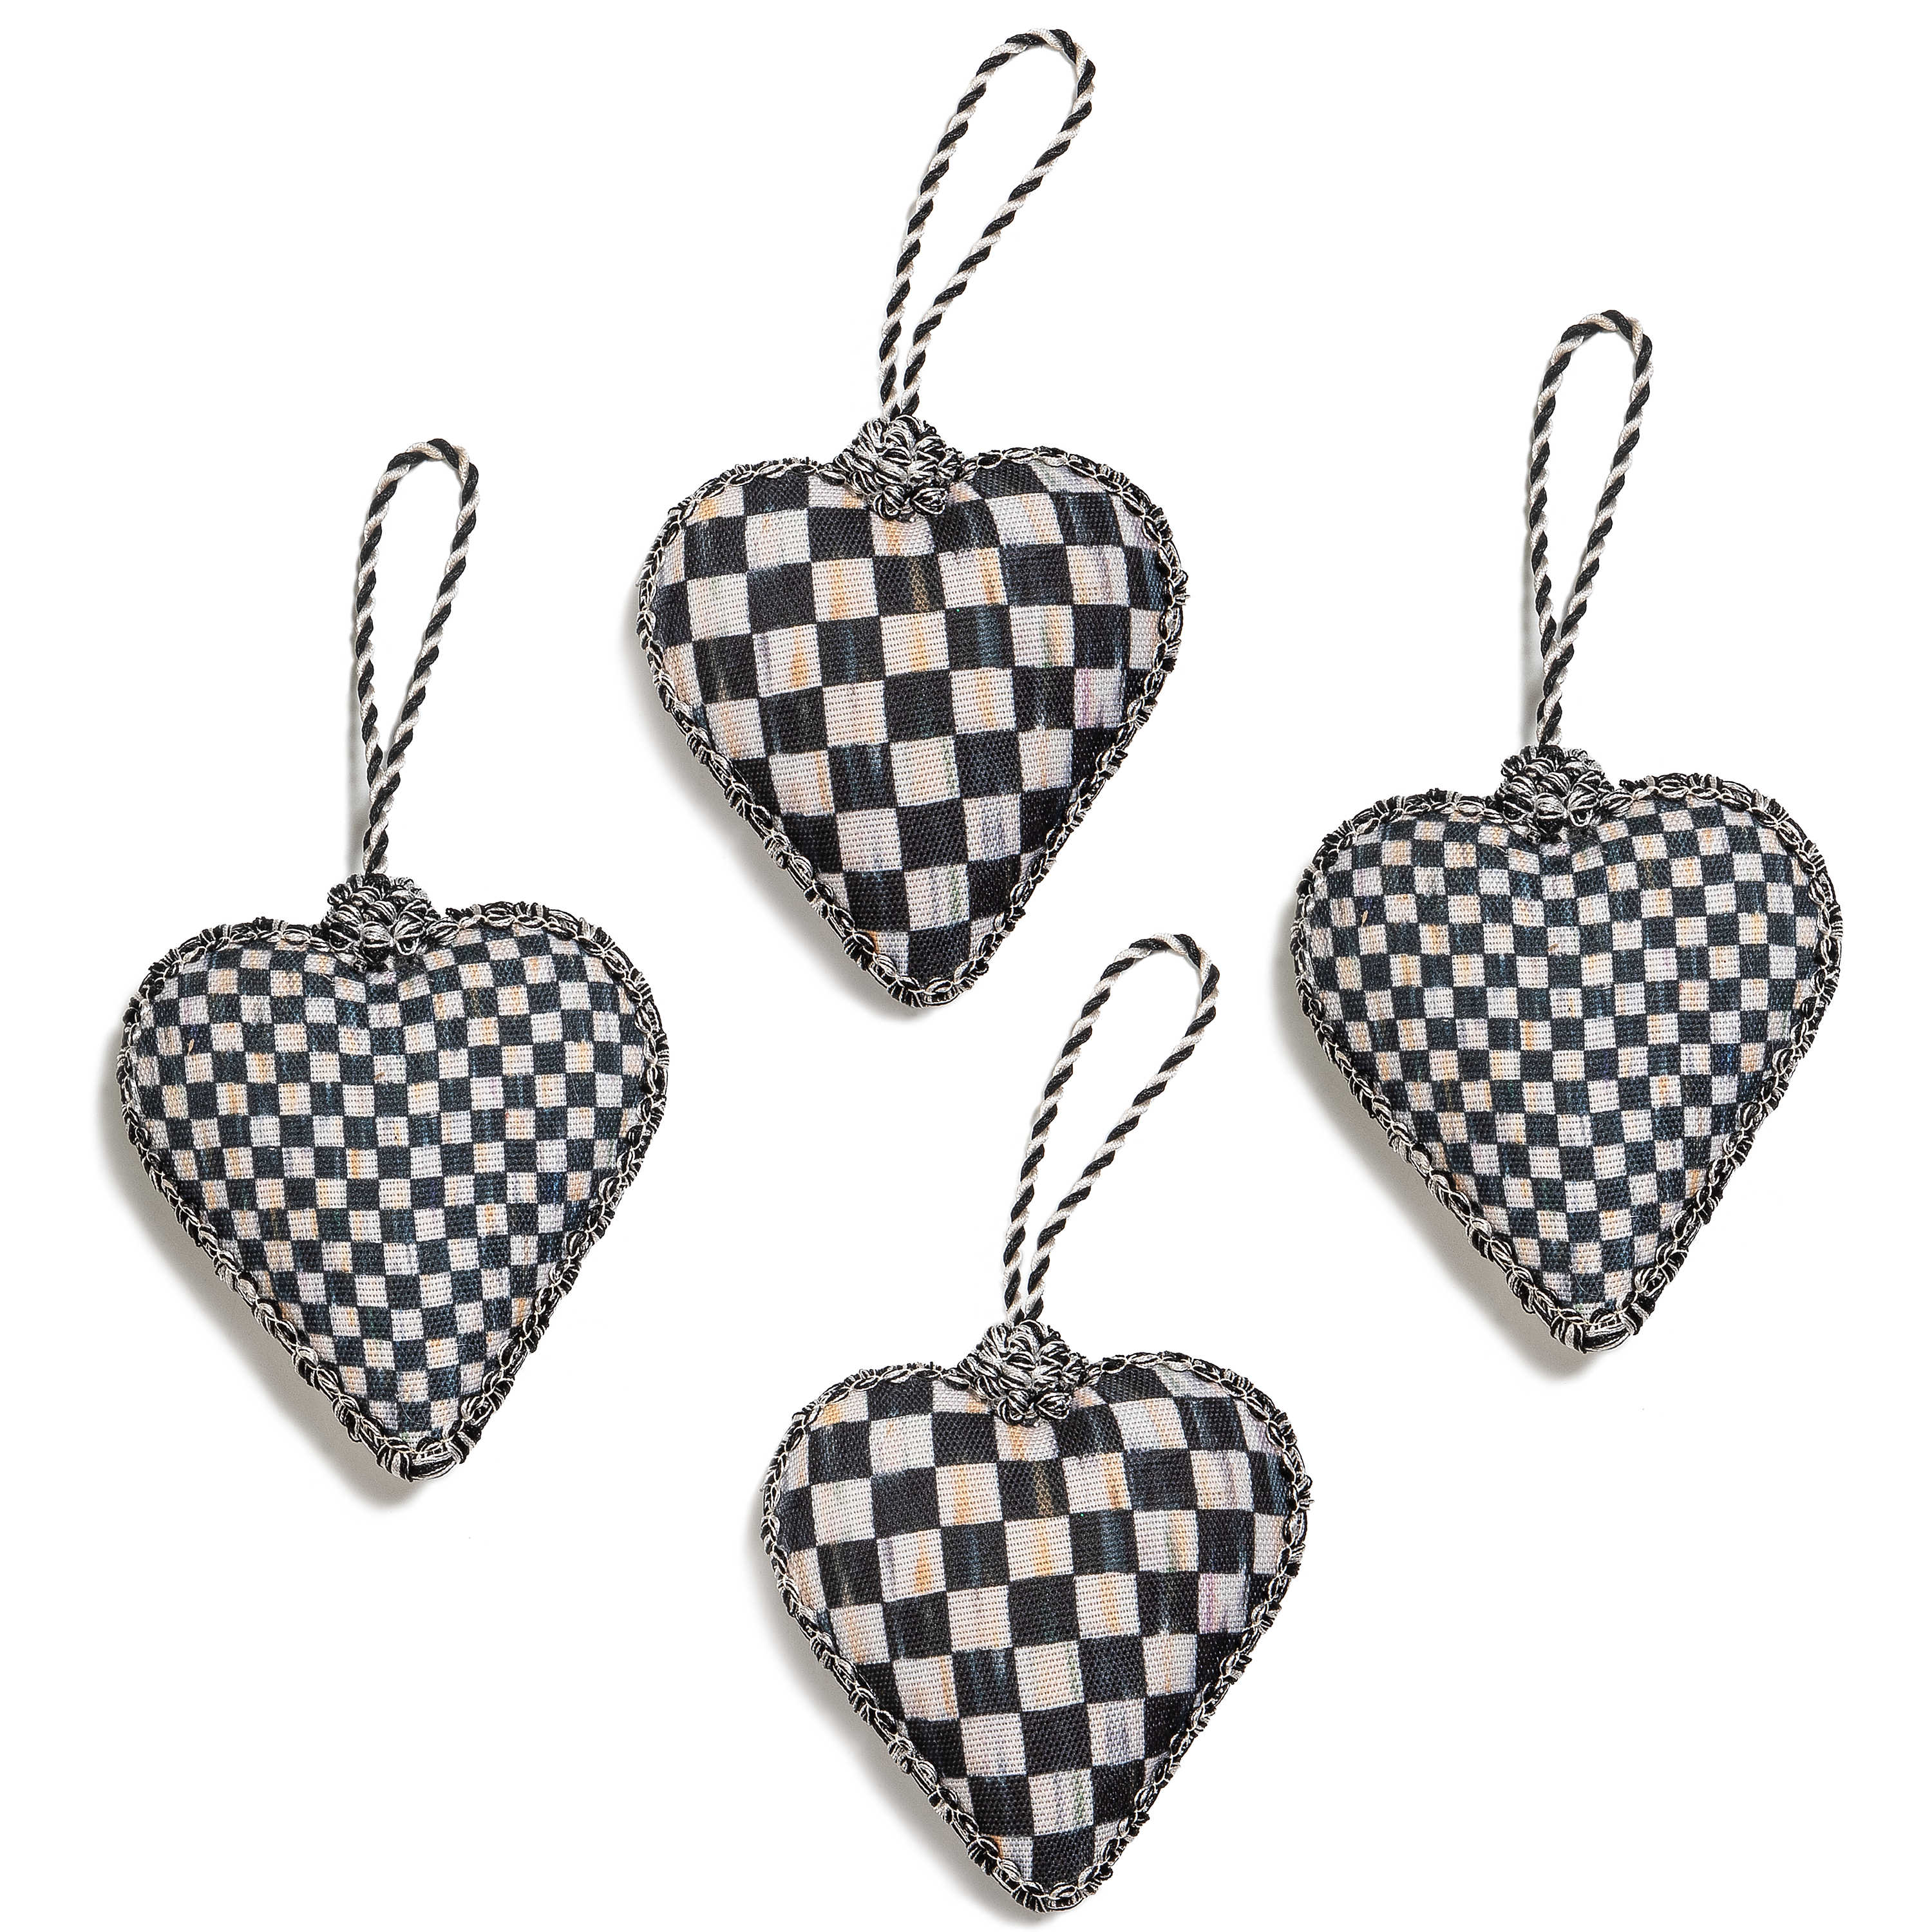 Courtly Check Heart Ornaments, Set of 4 mackenzie-childs Panama 0